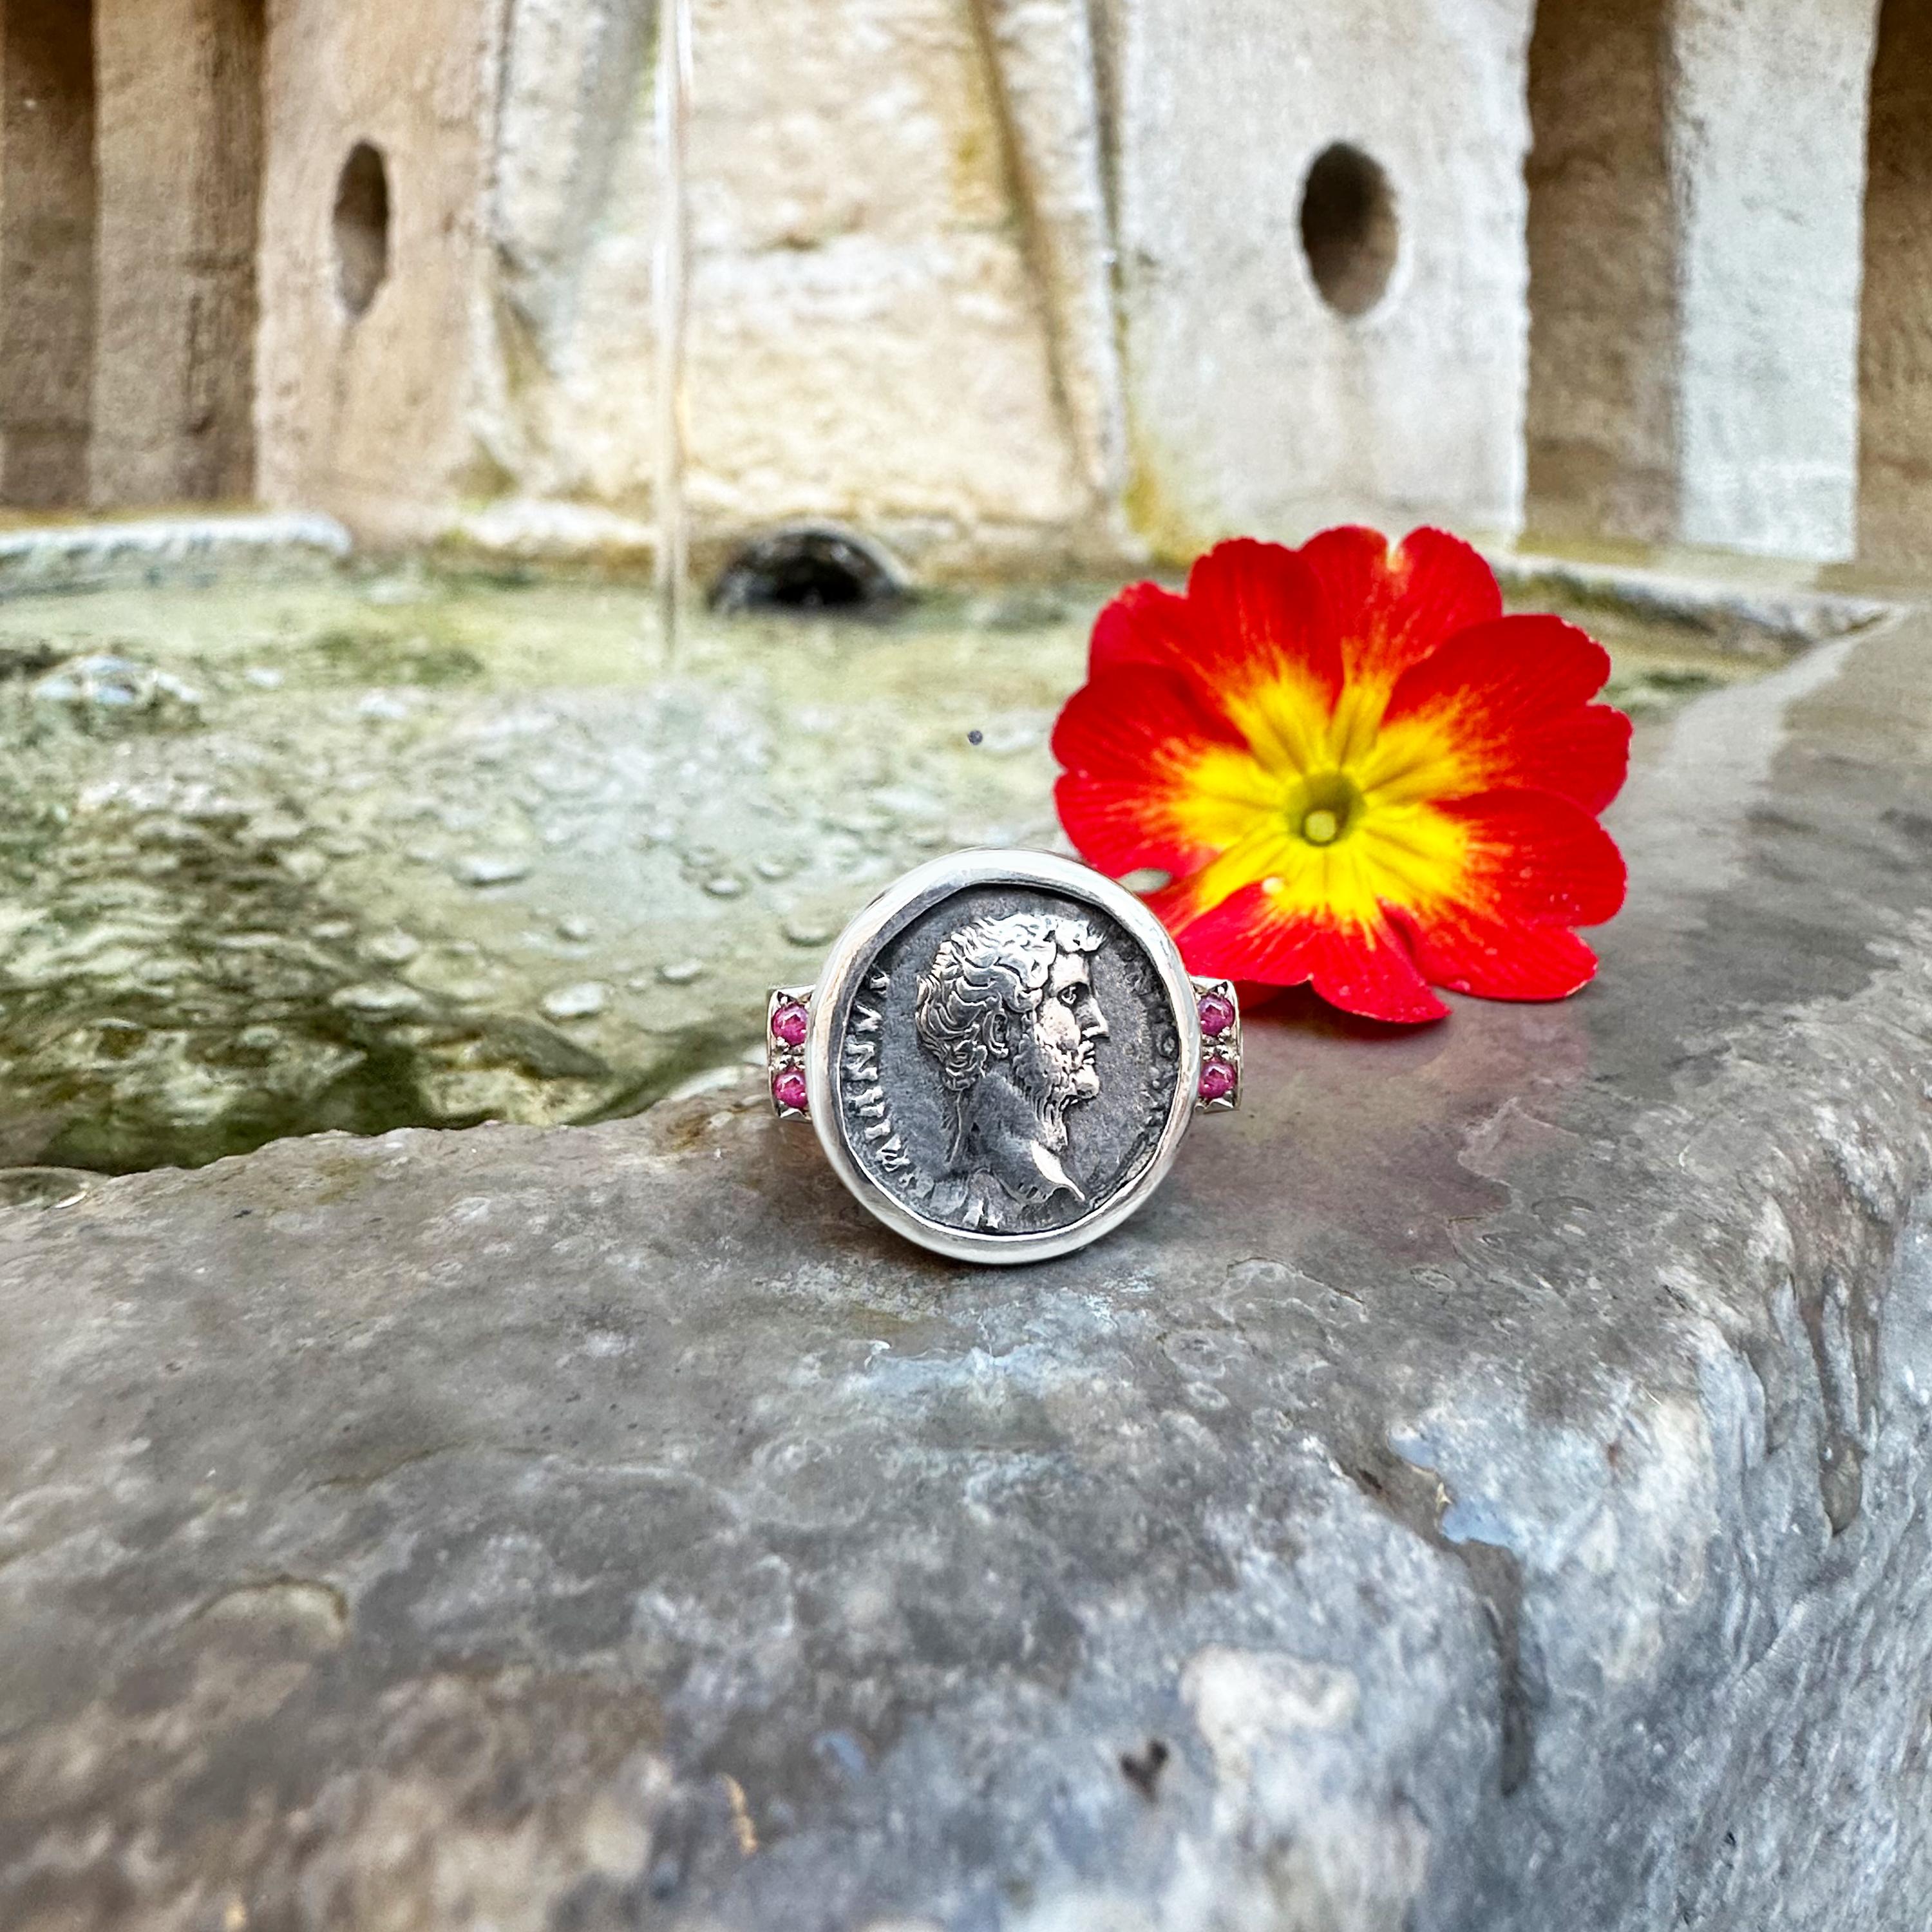 Behold this exquisite sterling silver ring graced with four delicate rubies adorning its sides. A true treasure lies within, a genuine Roman coin featuring the majestic likeness of Emperor Hadrian. Known for his illustrious journeys, ambitious